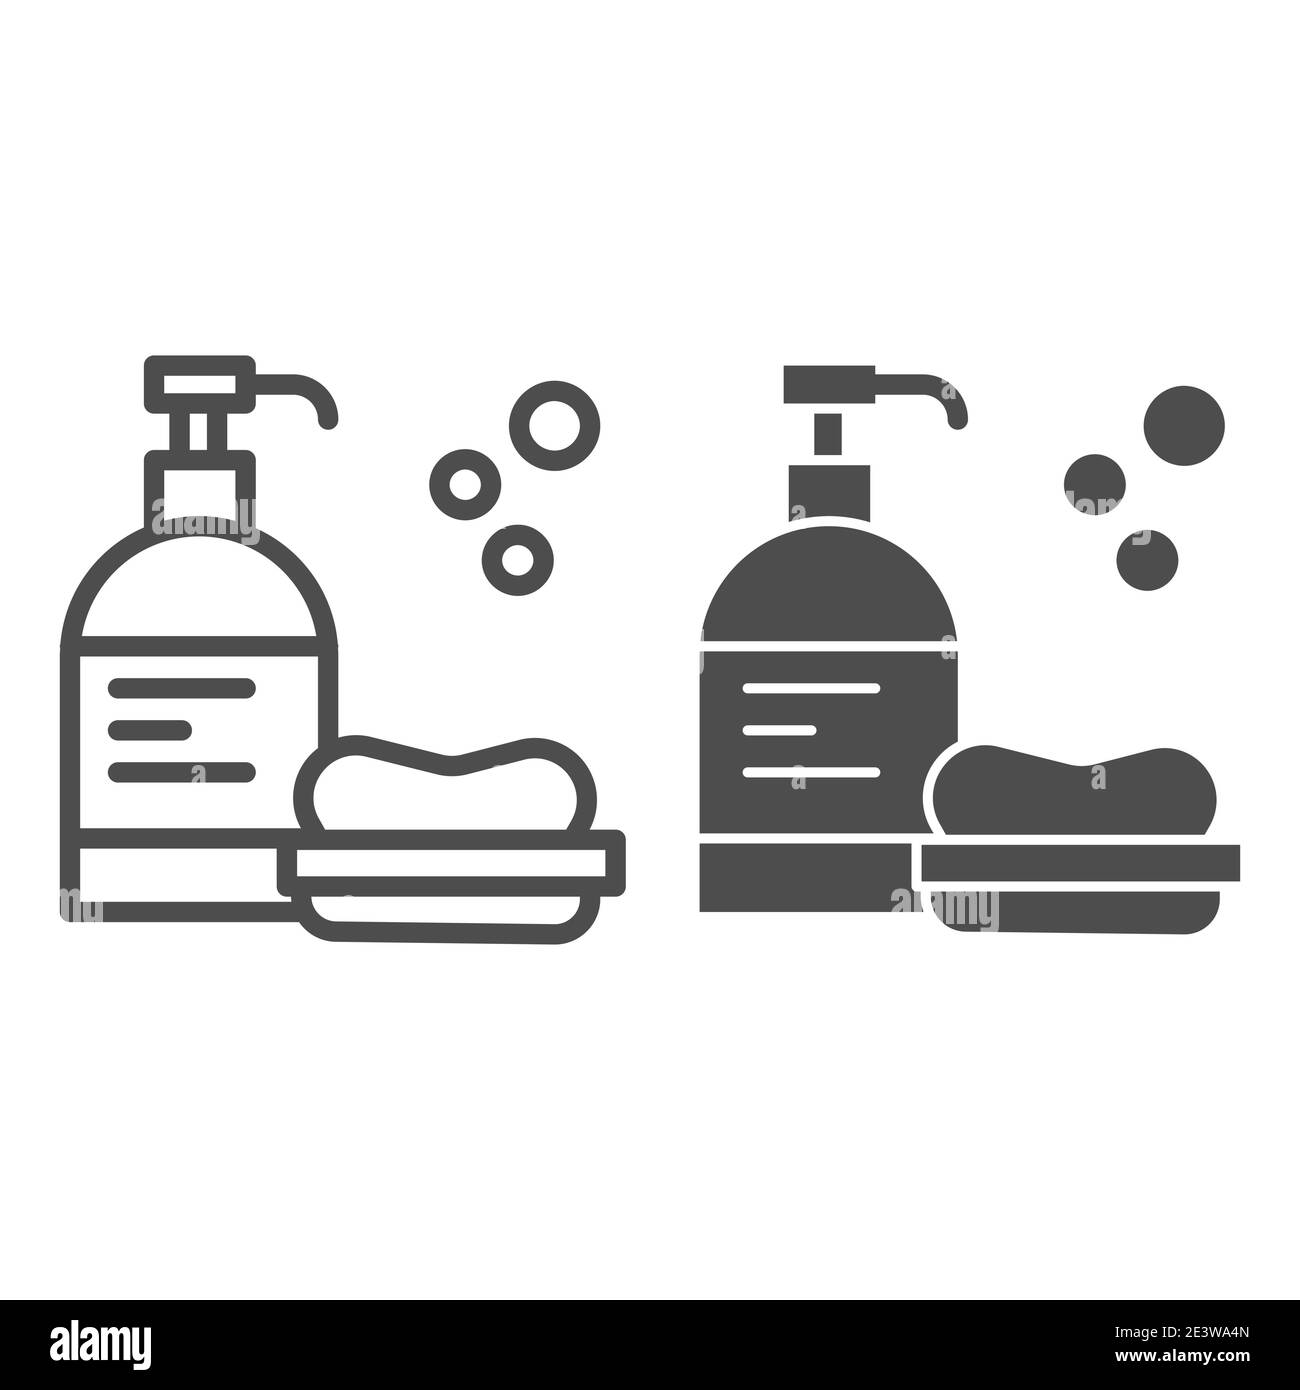 Licquid gel and soap line and solid icon, Personal hygiene concept, Hand soap and lotion sign on white background, bathing stuff icon set in outline Stock Vector